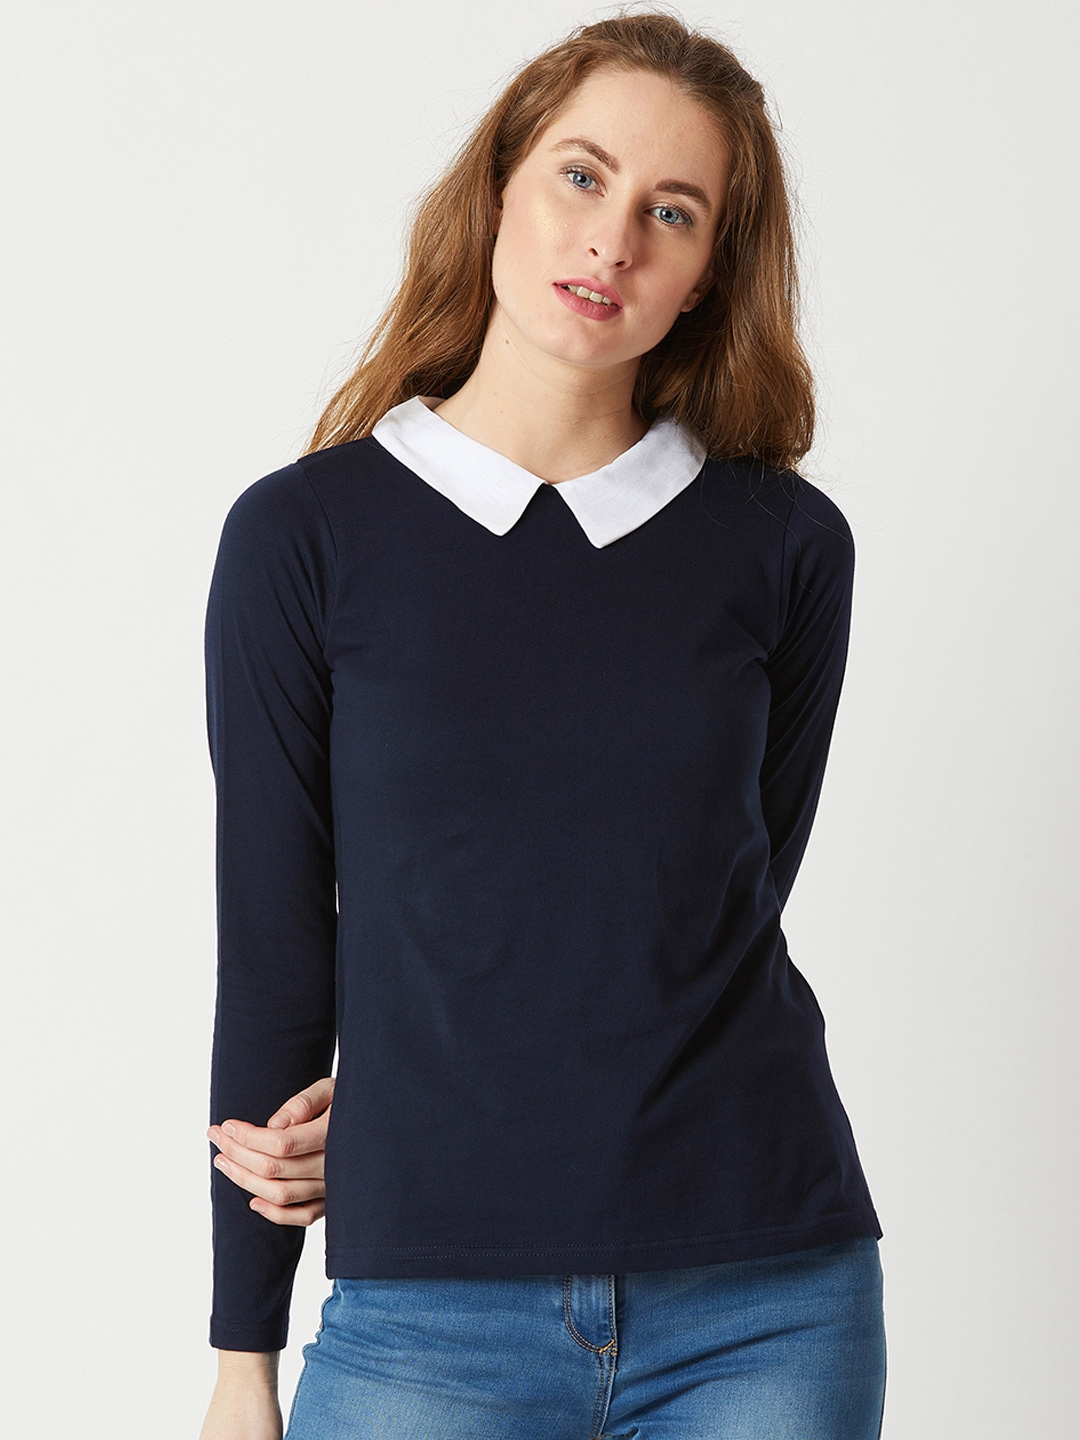 Buy Miss Chase Navy Blue Pure Cotton Top -  - Apparel for Women